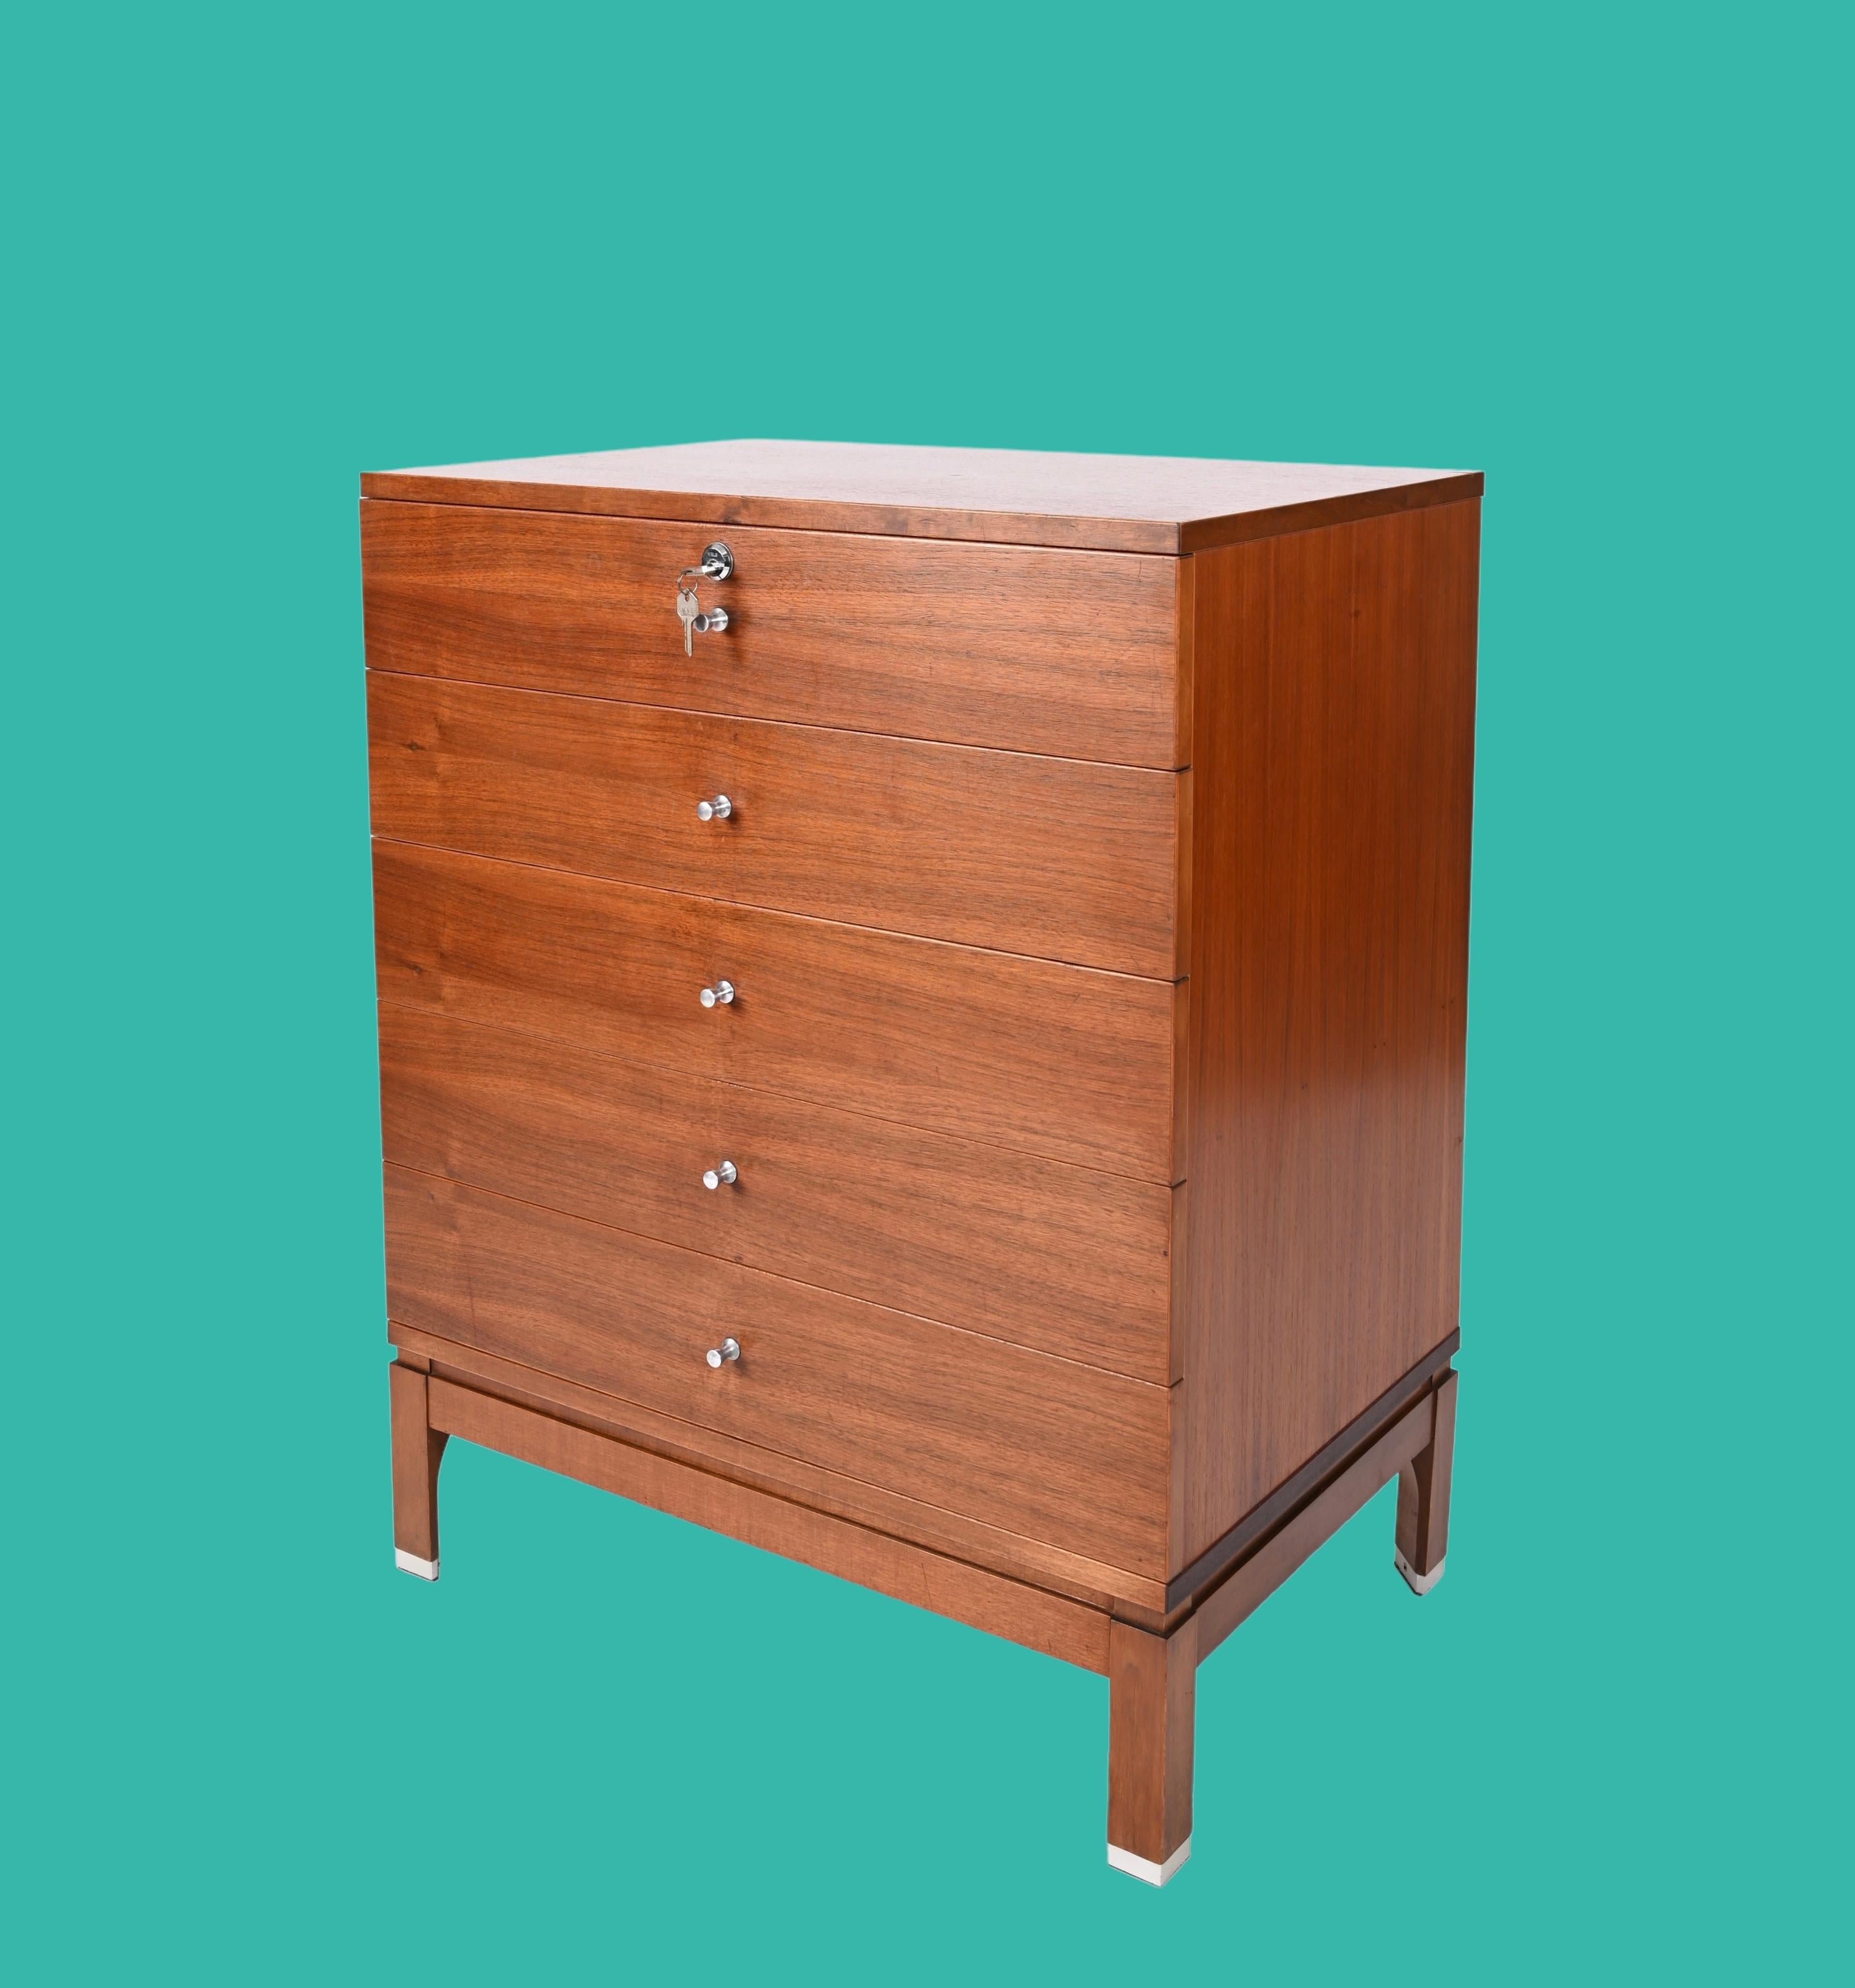 Aluminum Mid-Century Chest of Drawers in Walnut by Ico Parisi for MIM Roma, Italy 1960s For Sale